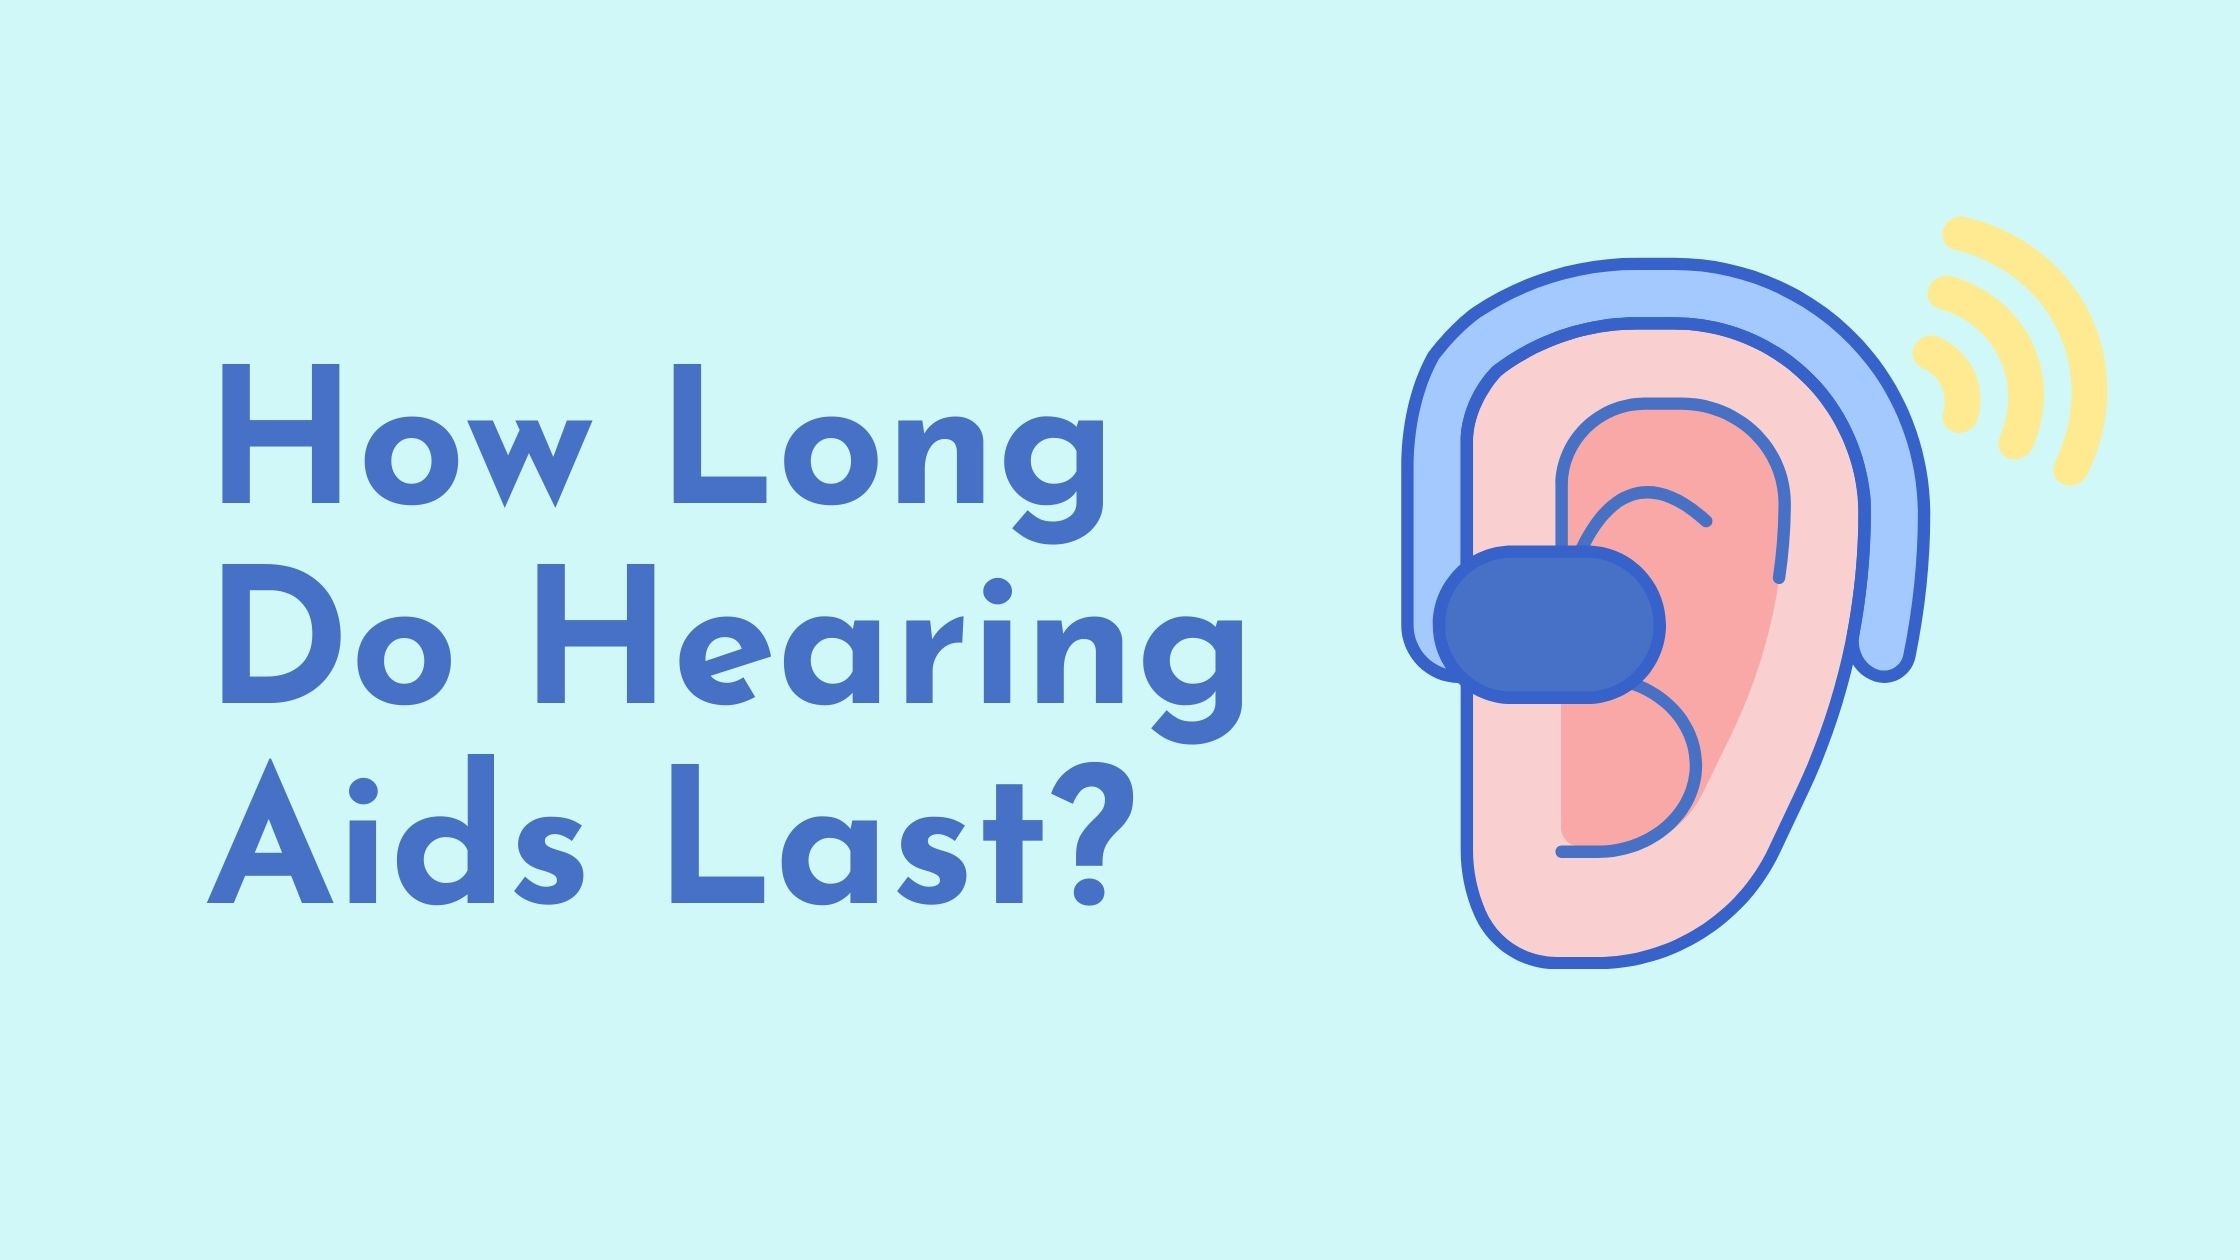 How Long Do Hearing Aids Last?